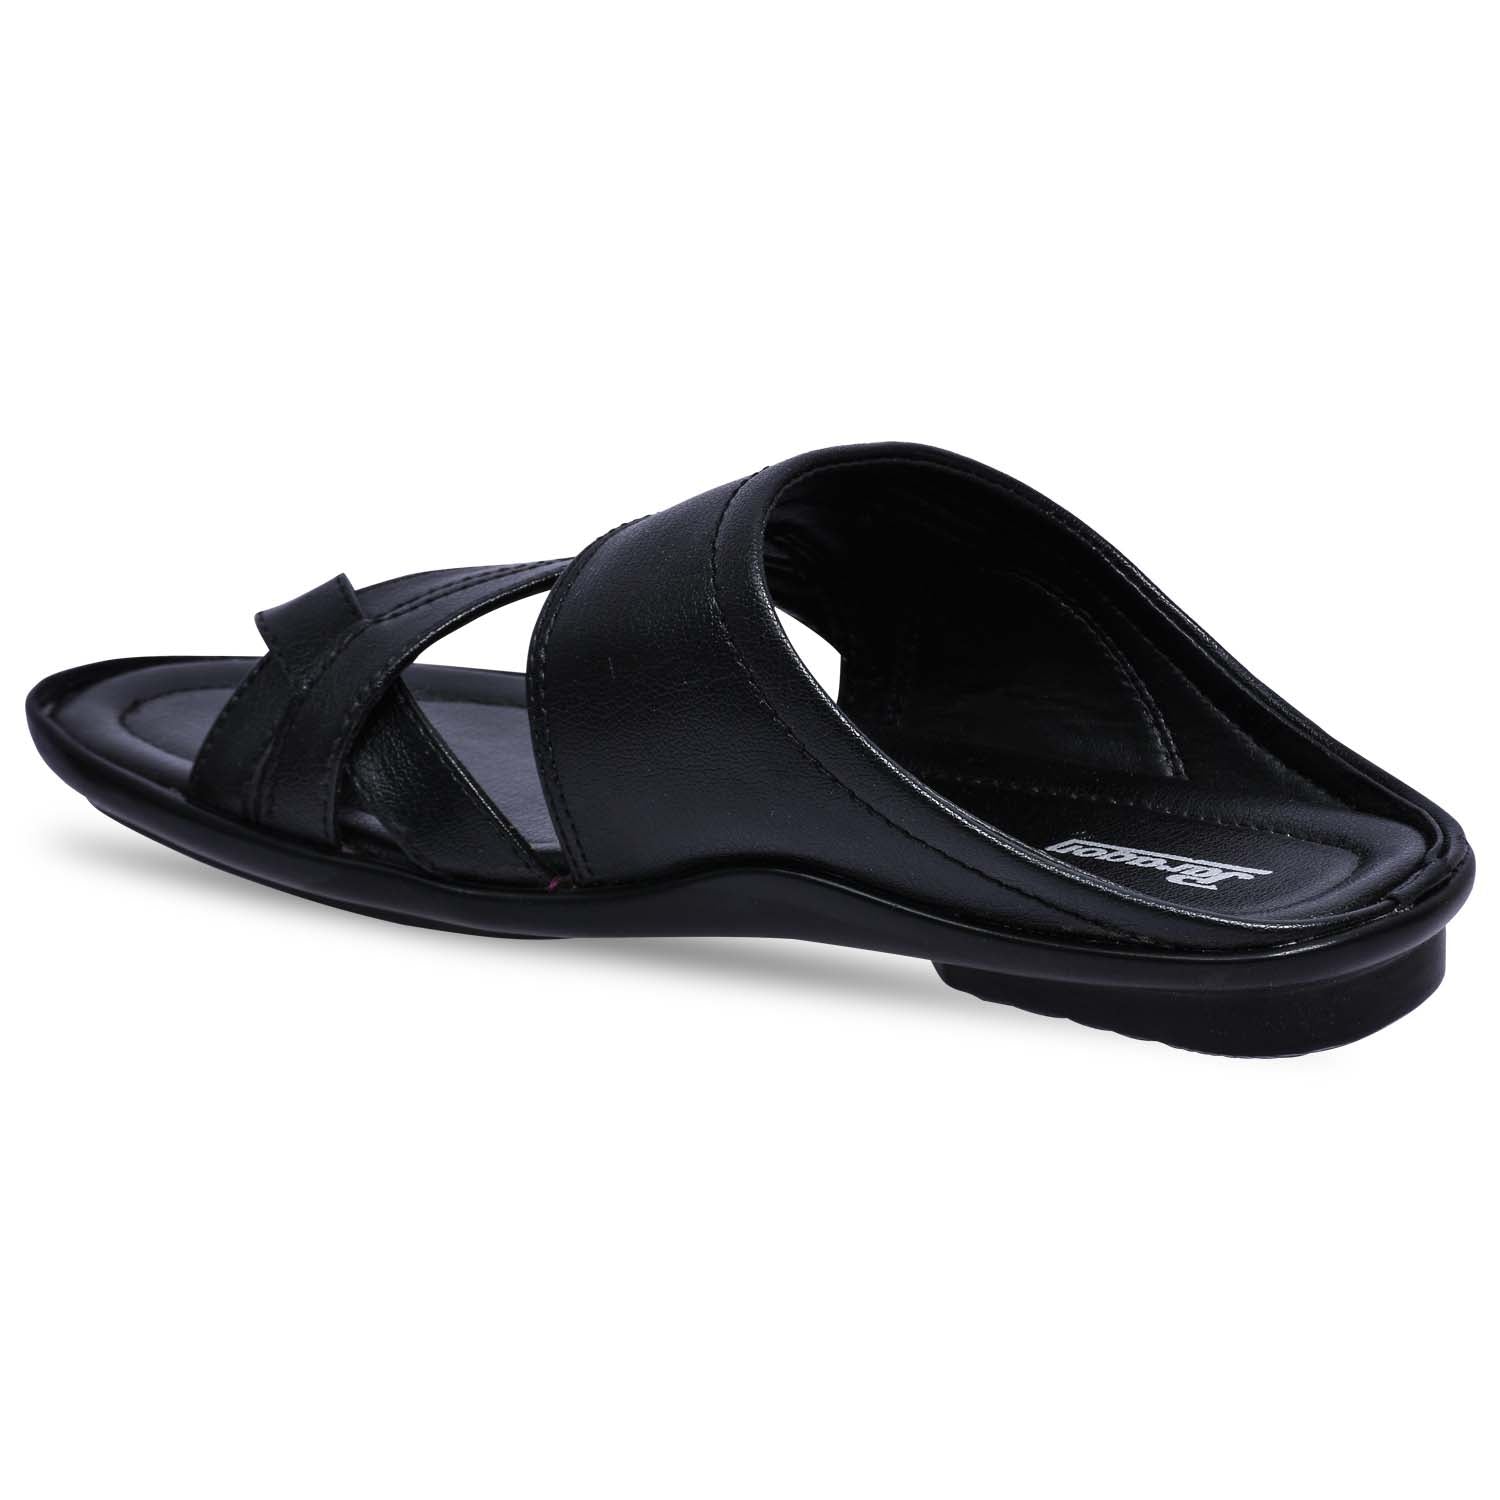 Paragon R4003G Men Stylish Sandals | Comfortable Sandals for Daily Outdoor Use | Casual Formal Sandals with Cushioned Soles